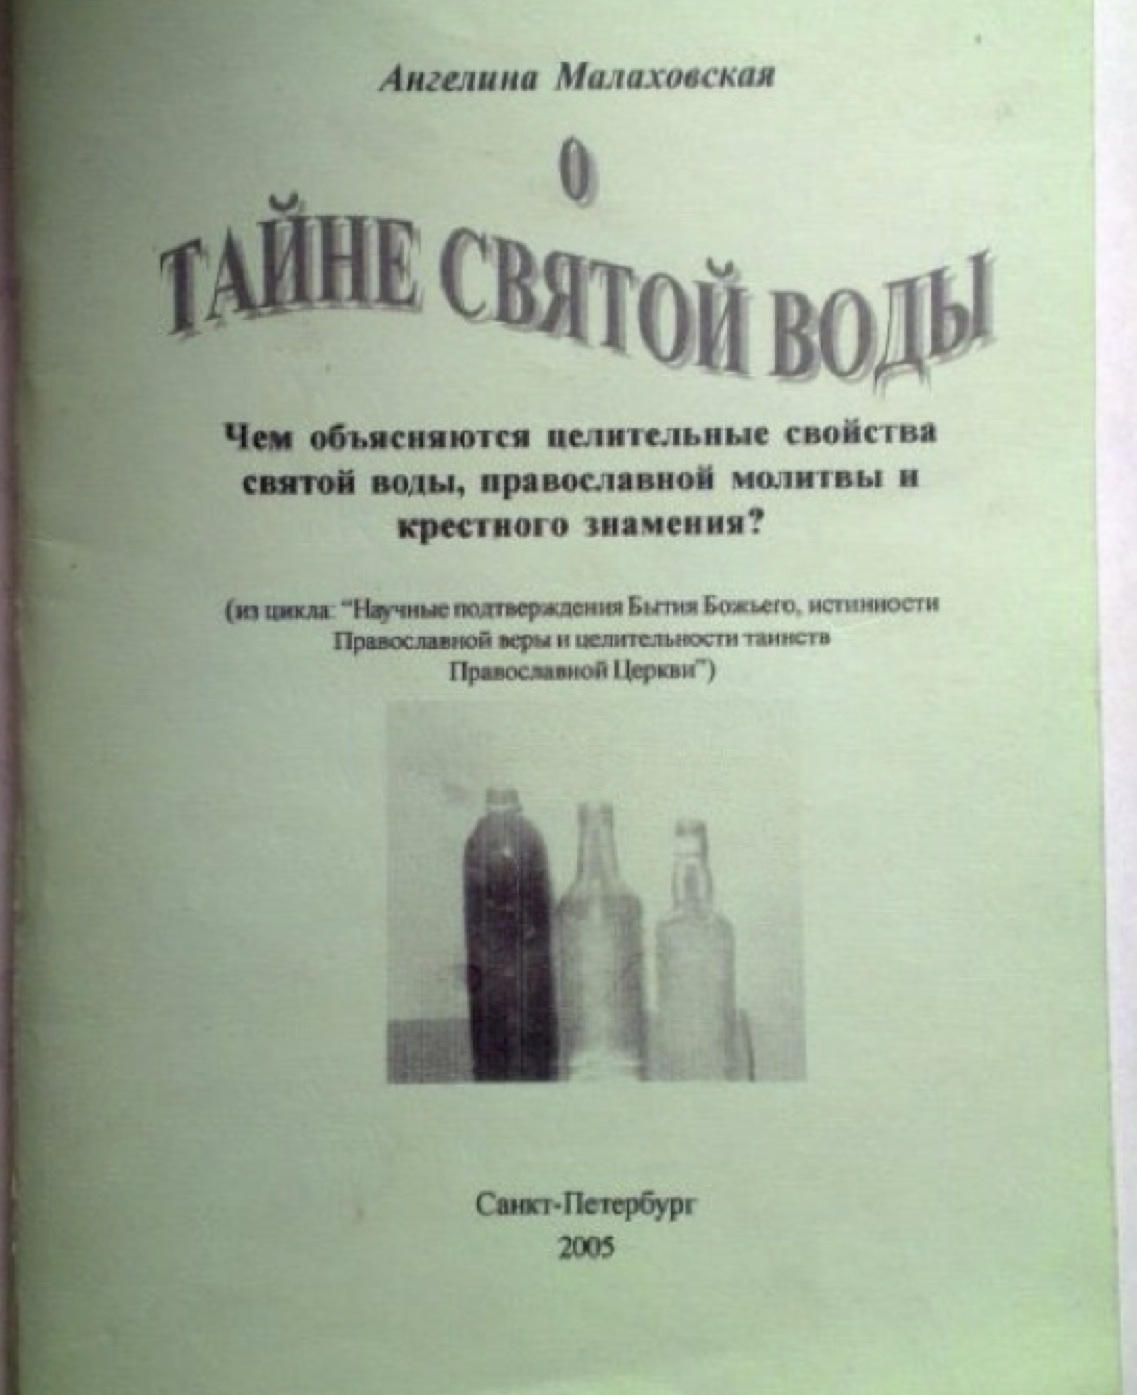 The cover of the work that started it all. The name of the author Angelina Malakhovskaya is at the top. The title and the subtitle are About the Secrets of Holy Water and How do the Healing Properties of Holy Water, Eastern-Orthodox Prayer and the Sign of the Cross Manifest Themselves?, respectively. In the parentheses, it reads From the Series: The scientific affirmation of the existence of God, the truth of Eastern Orthodox faith, and the healing powers of the sacraments of the Eastern Orthodox Church. It is published in 2005 in St. Petersburg. 